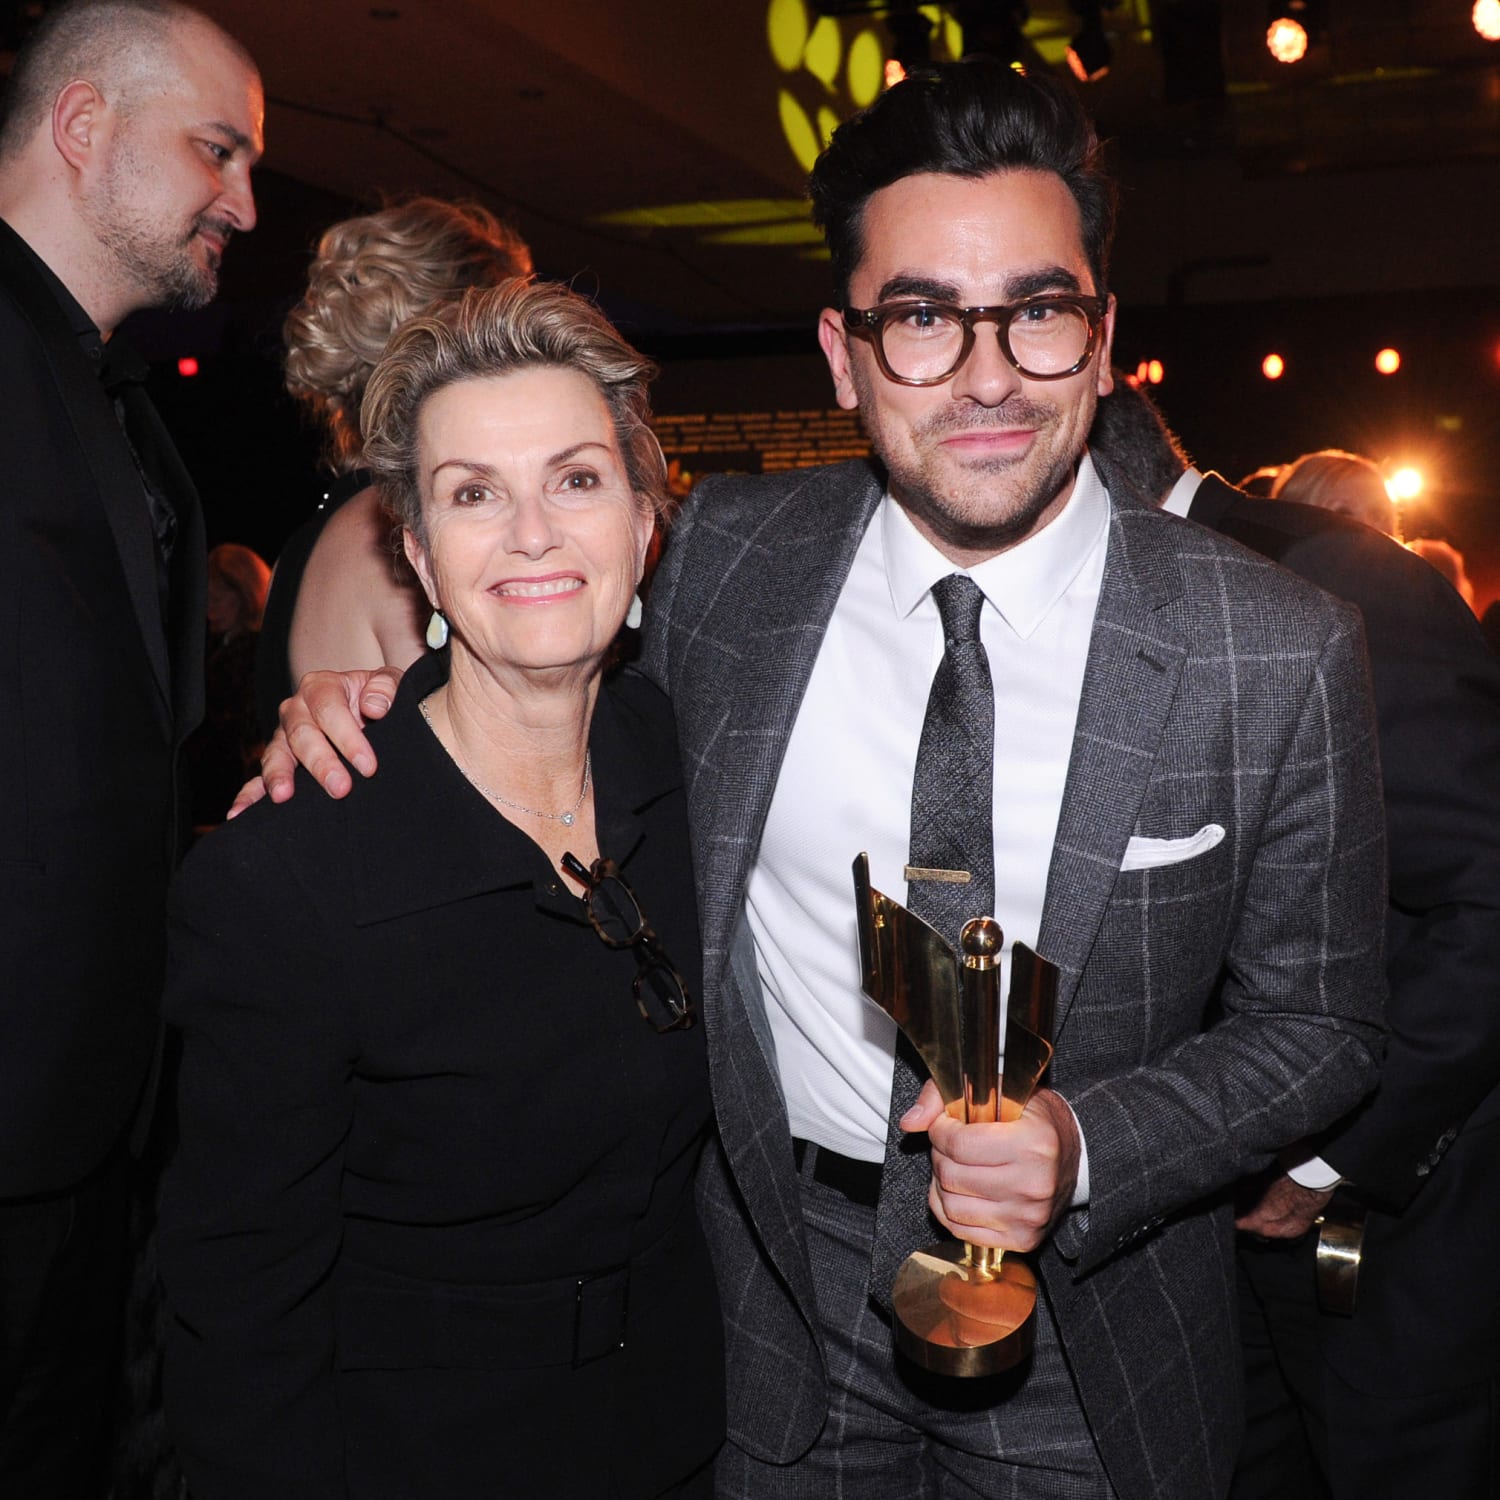 Dan Levy's mom calls out his childhood bullies ahead of 'SNL' debut